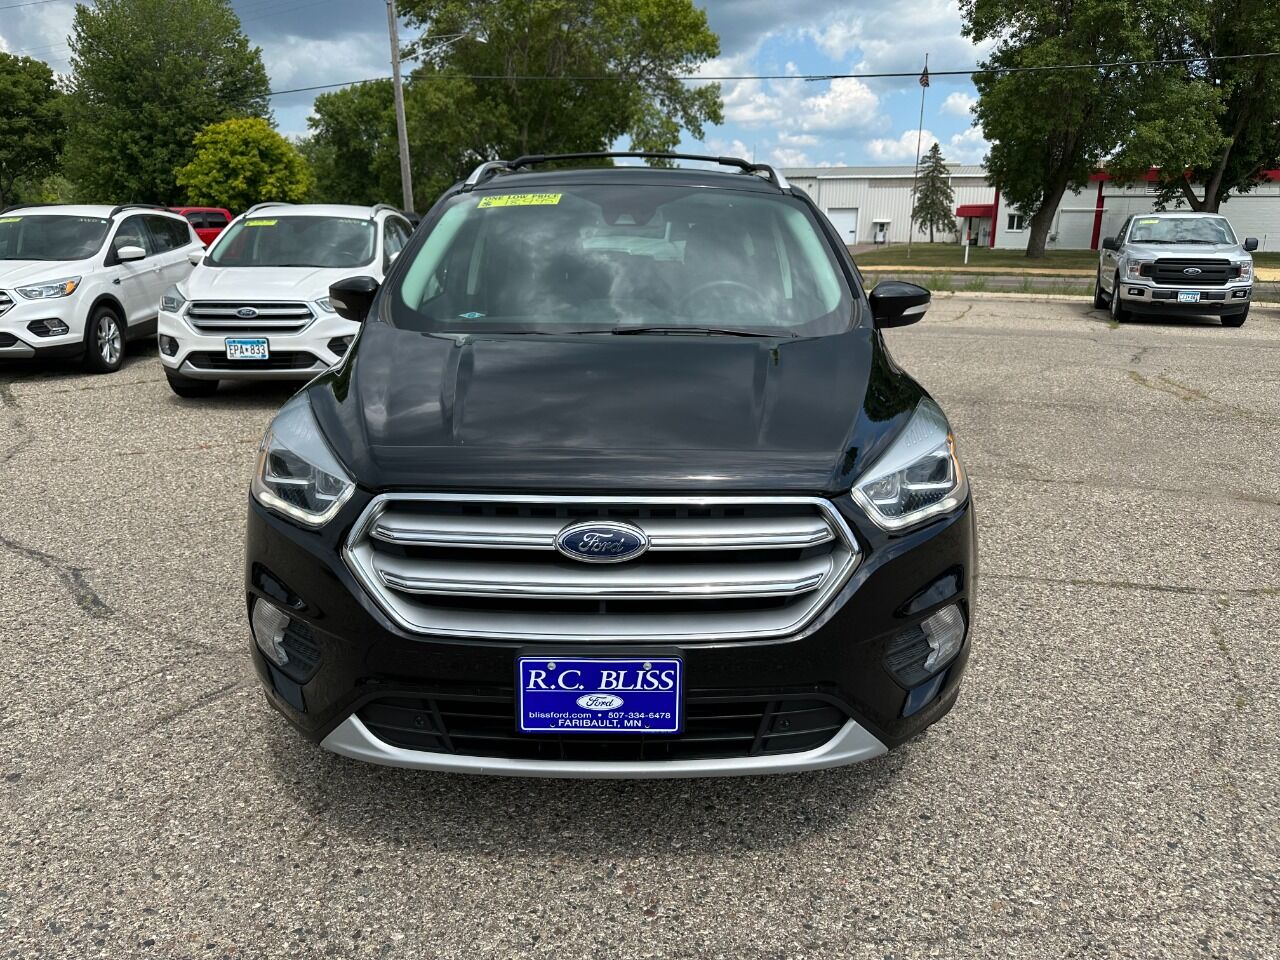 Used 2017 Ford Escape Titanium with VIN 1FMCU9J97HUA34178 for sale in Faribault, Minnesota